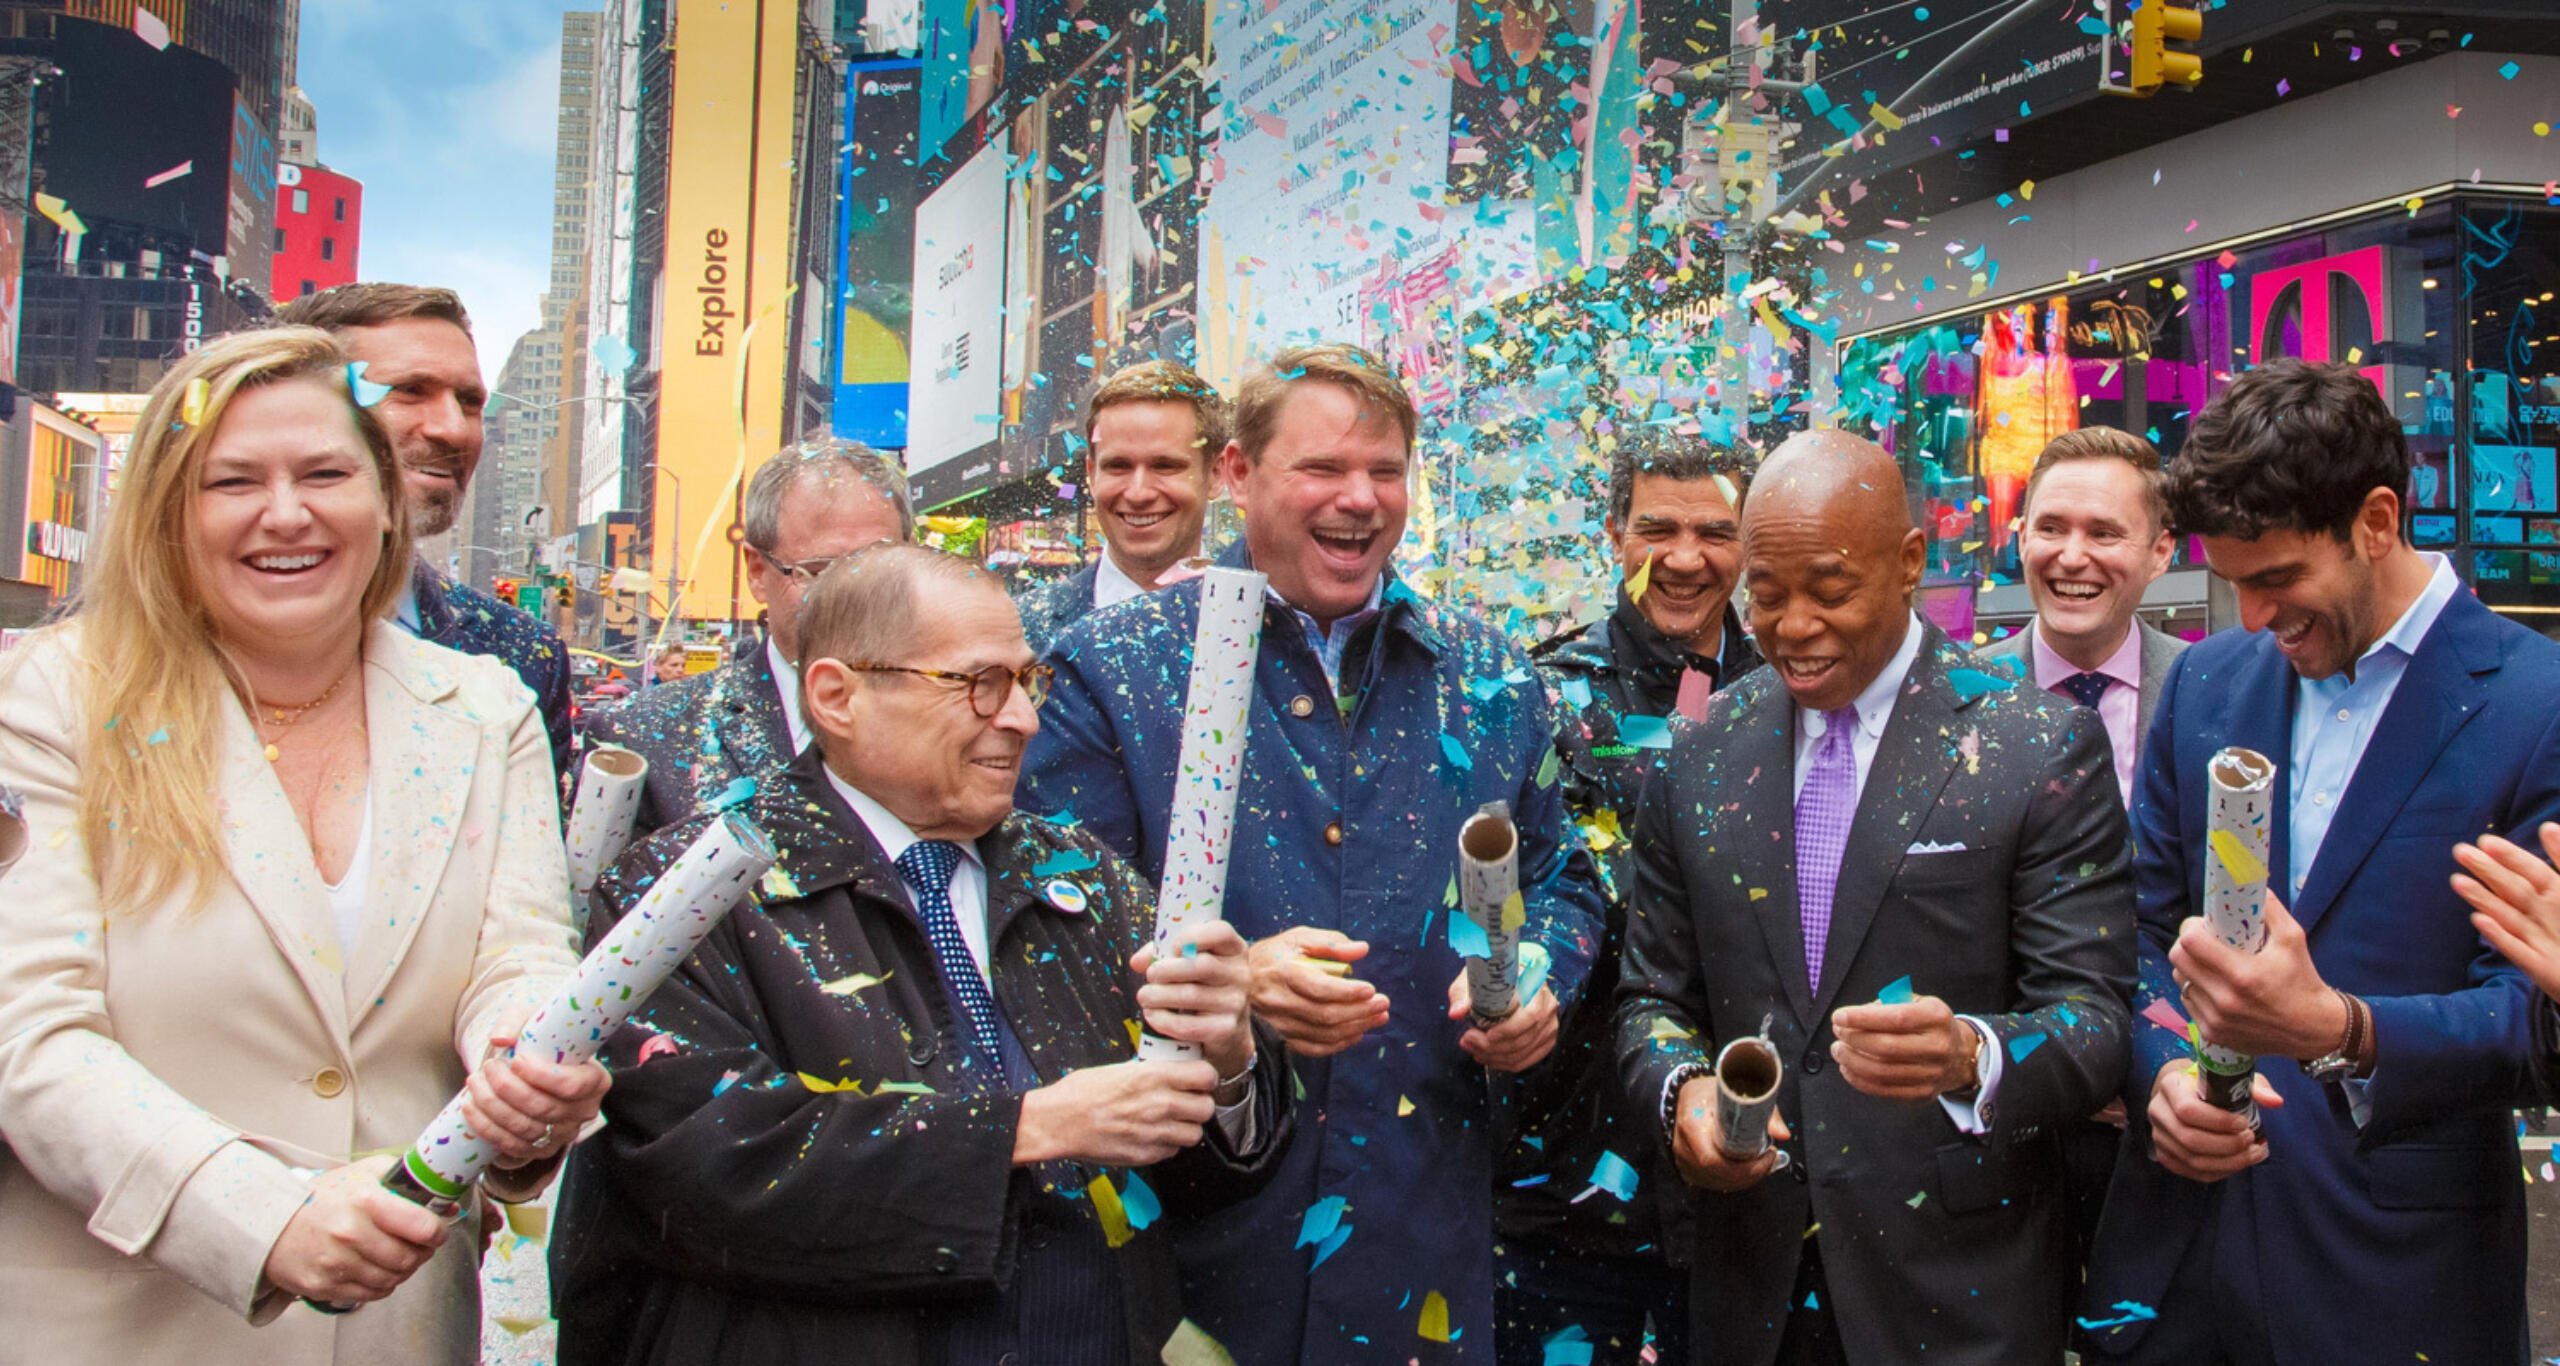 People gathered in Times Square launching confetti to celebrate the announcement of One Time Square's redevelopment